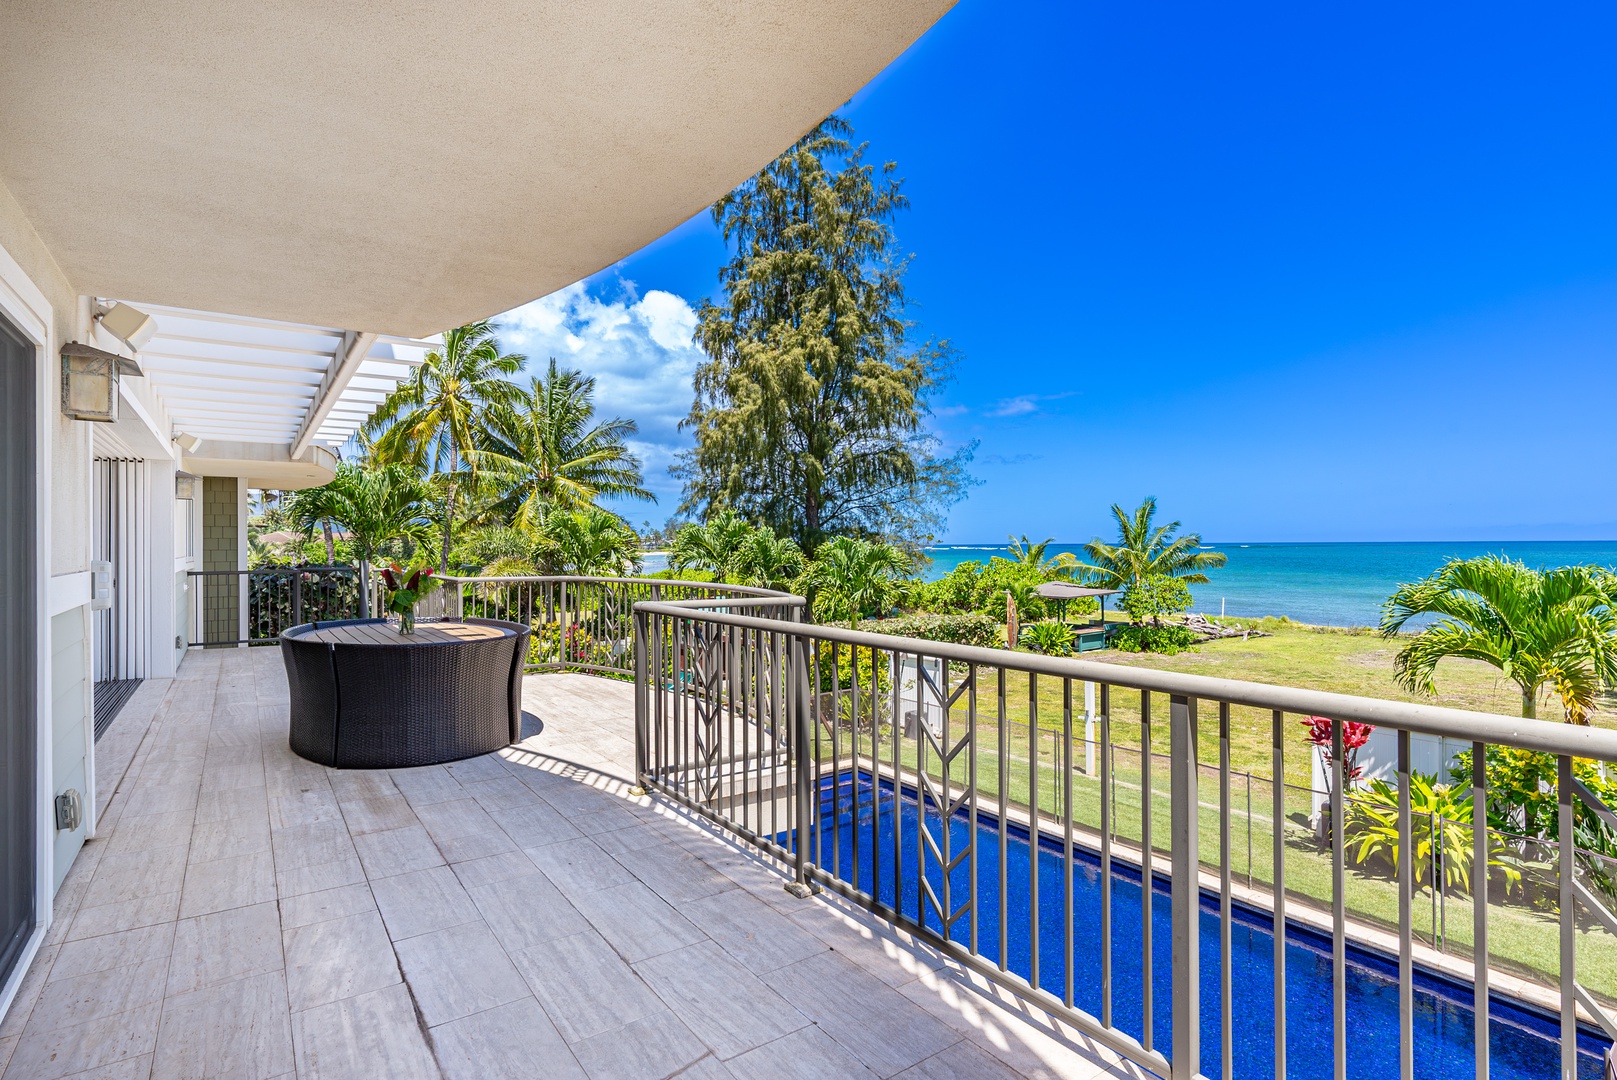 Waialua Vacation Rentals, Kala'iku Main - Experience the ultimate paradise in our Hawaii vacation rental with breathtaking ocean views, a luxurious pool, and hot tub